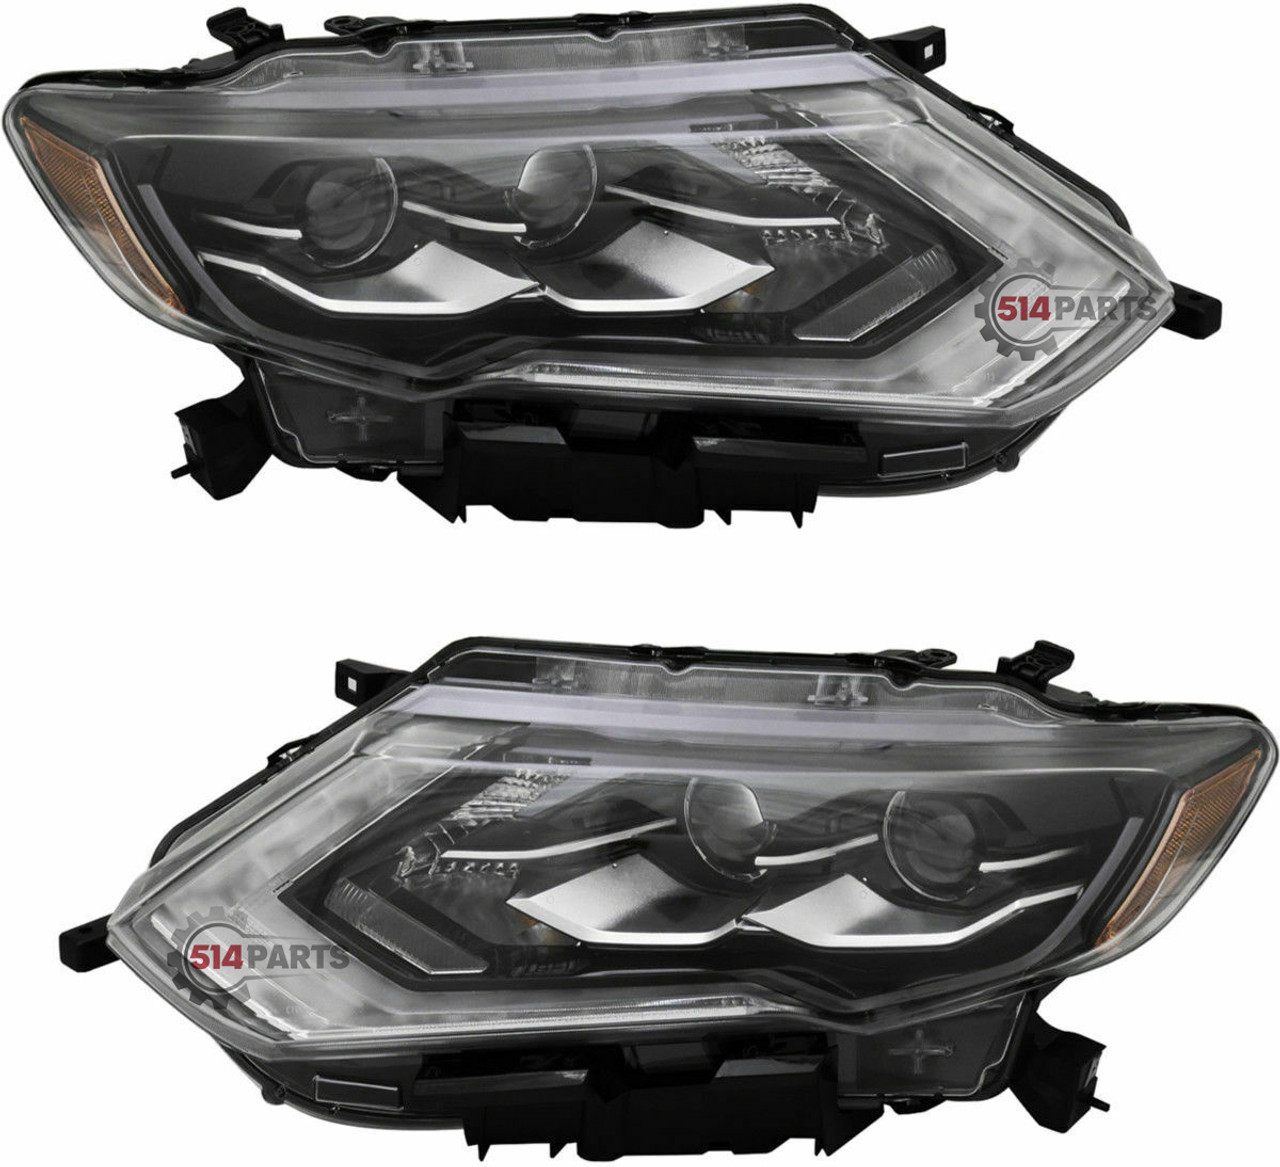 2017 - 2019 NISSAN ROGUE and ROGUE HYBRID LED HEADLIGHTS High Quality - PHARES AVANT a DEL Haute Qualite